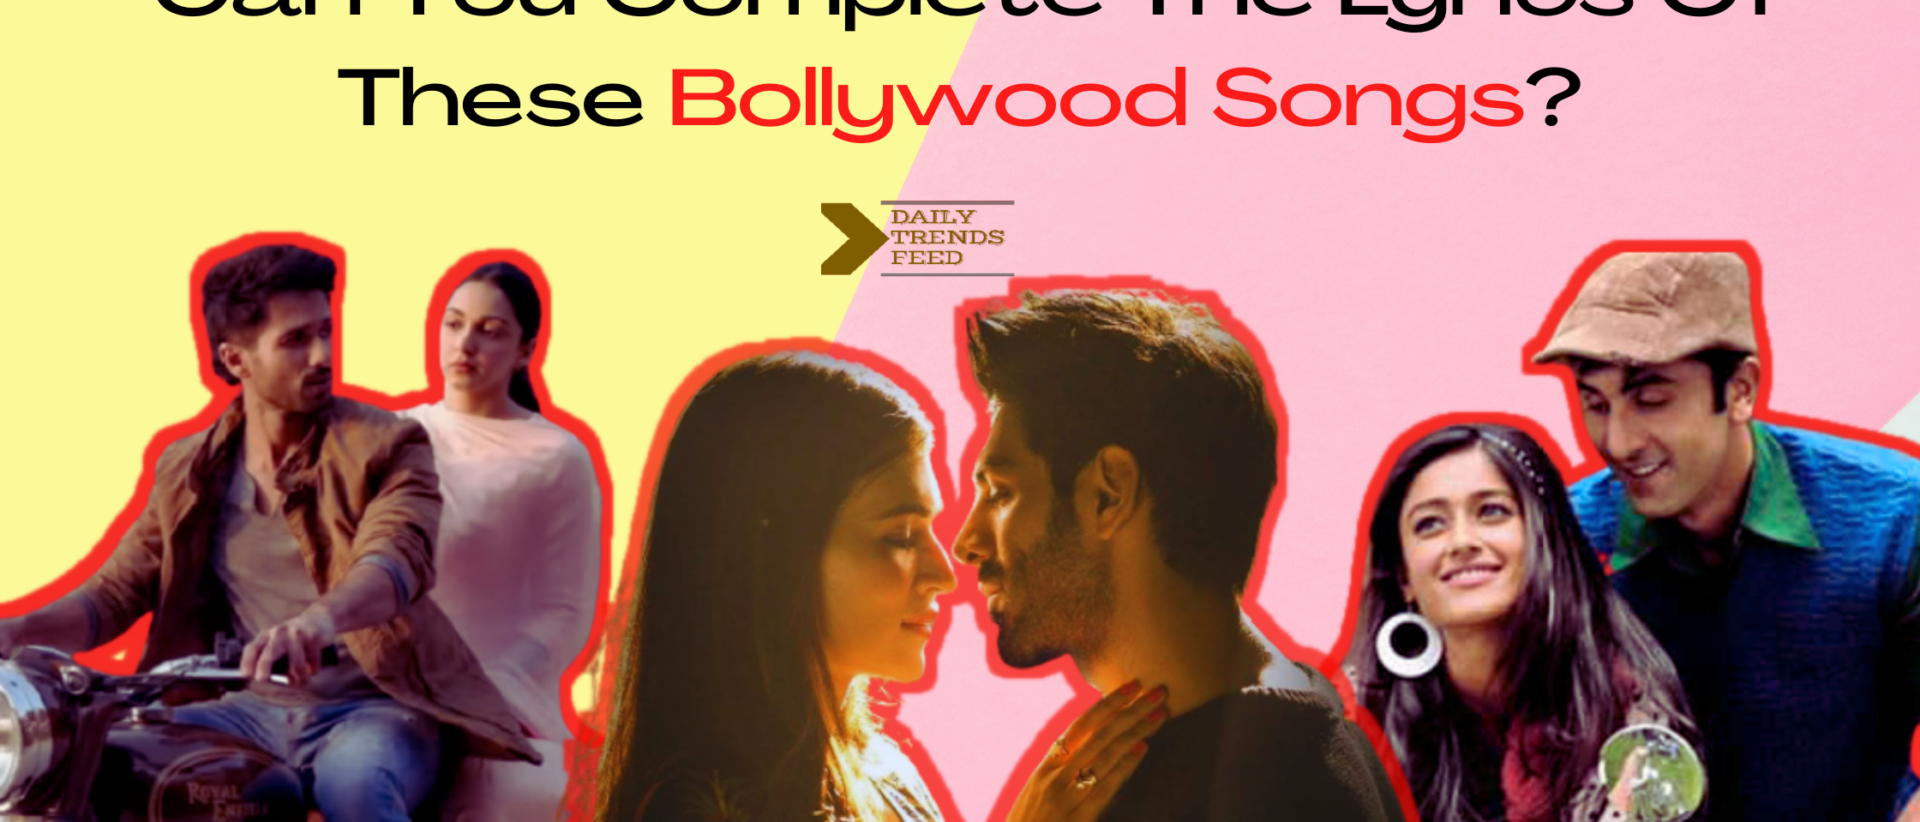 Bollywood Songs Lyrics Quiz: Can You Complete The Lyrics Of These Bollywood Songs?